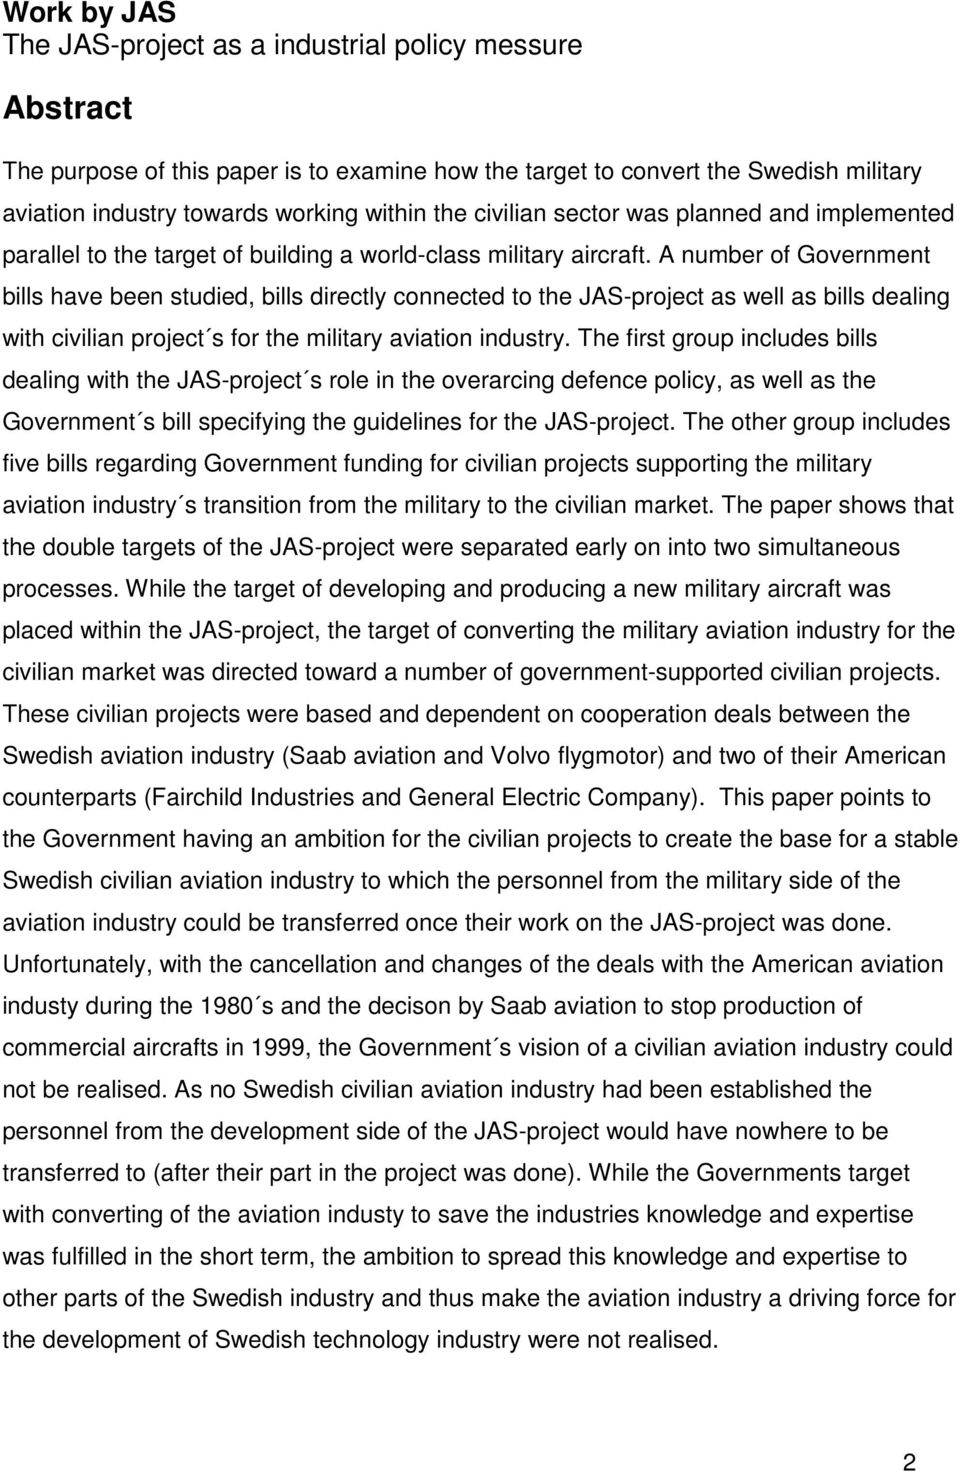 A number of Government bills have been studied, bills directly connected to the JAS-project as well as bills dealing with civilian project s for the military aviation industry.